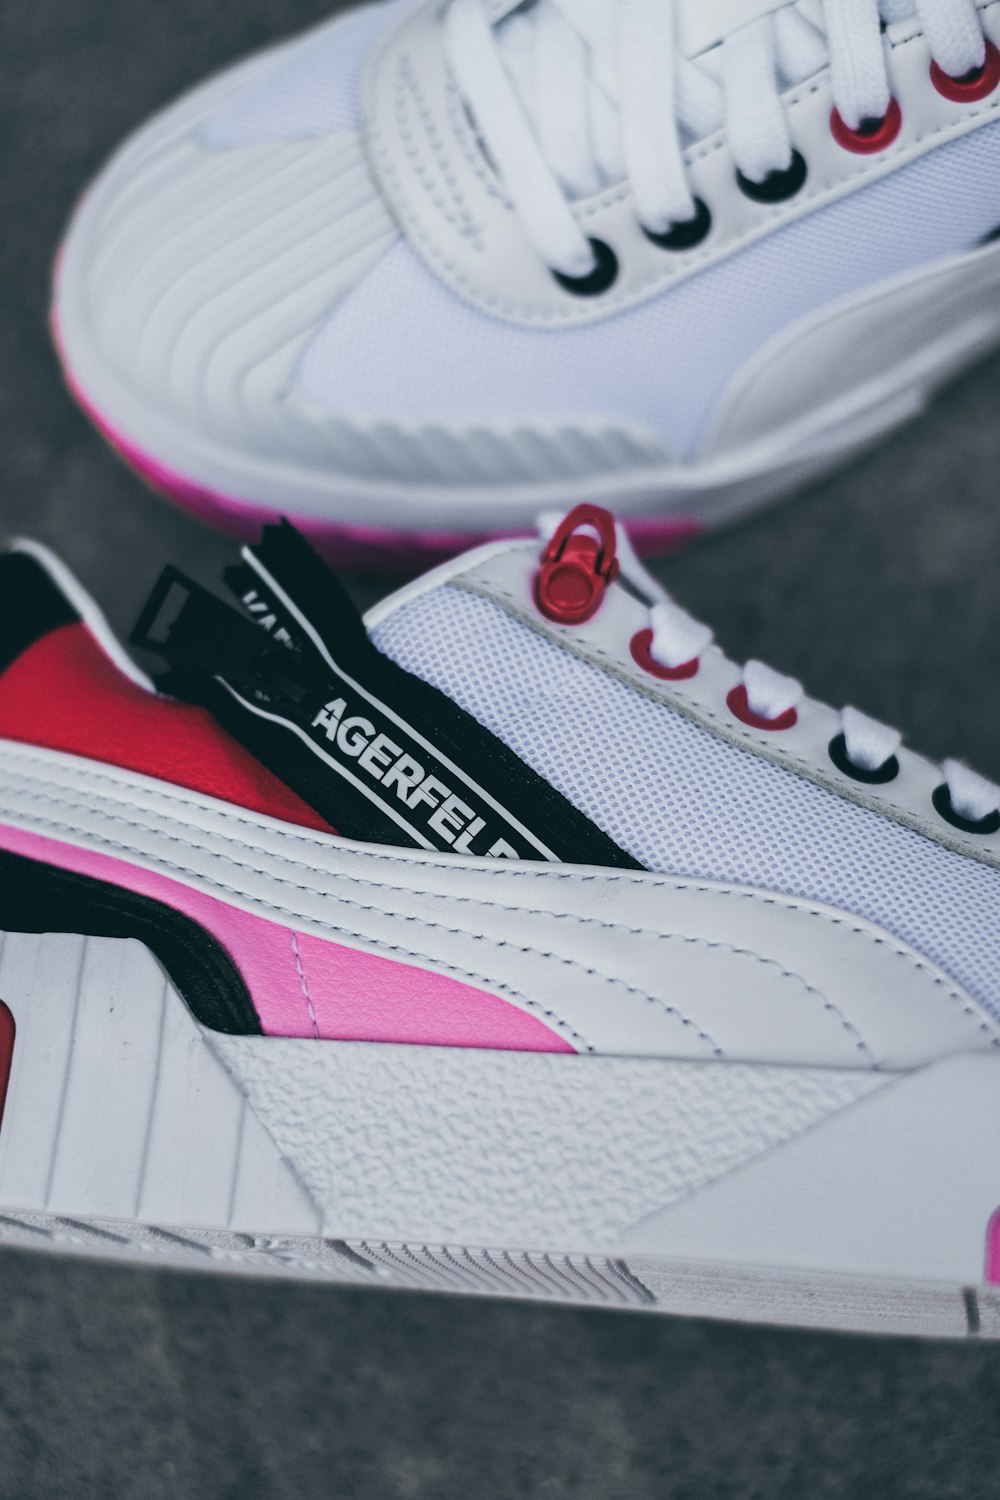 pair of white, pink, and black PUMA shoes photo – Free Apparel Image on  Unsplash